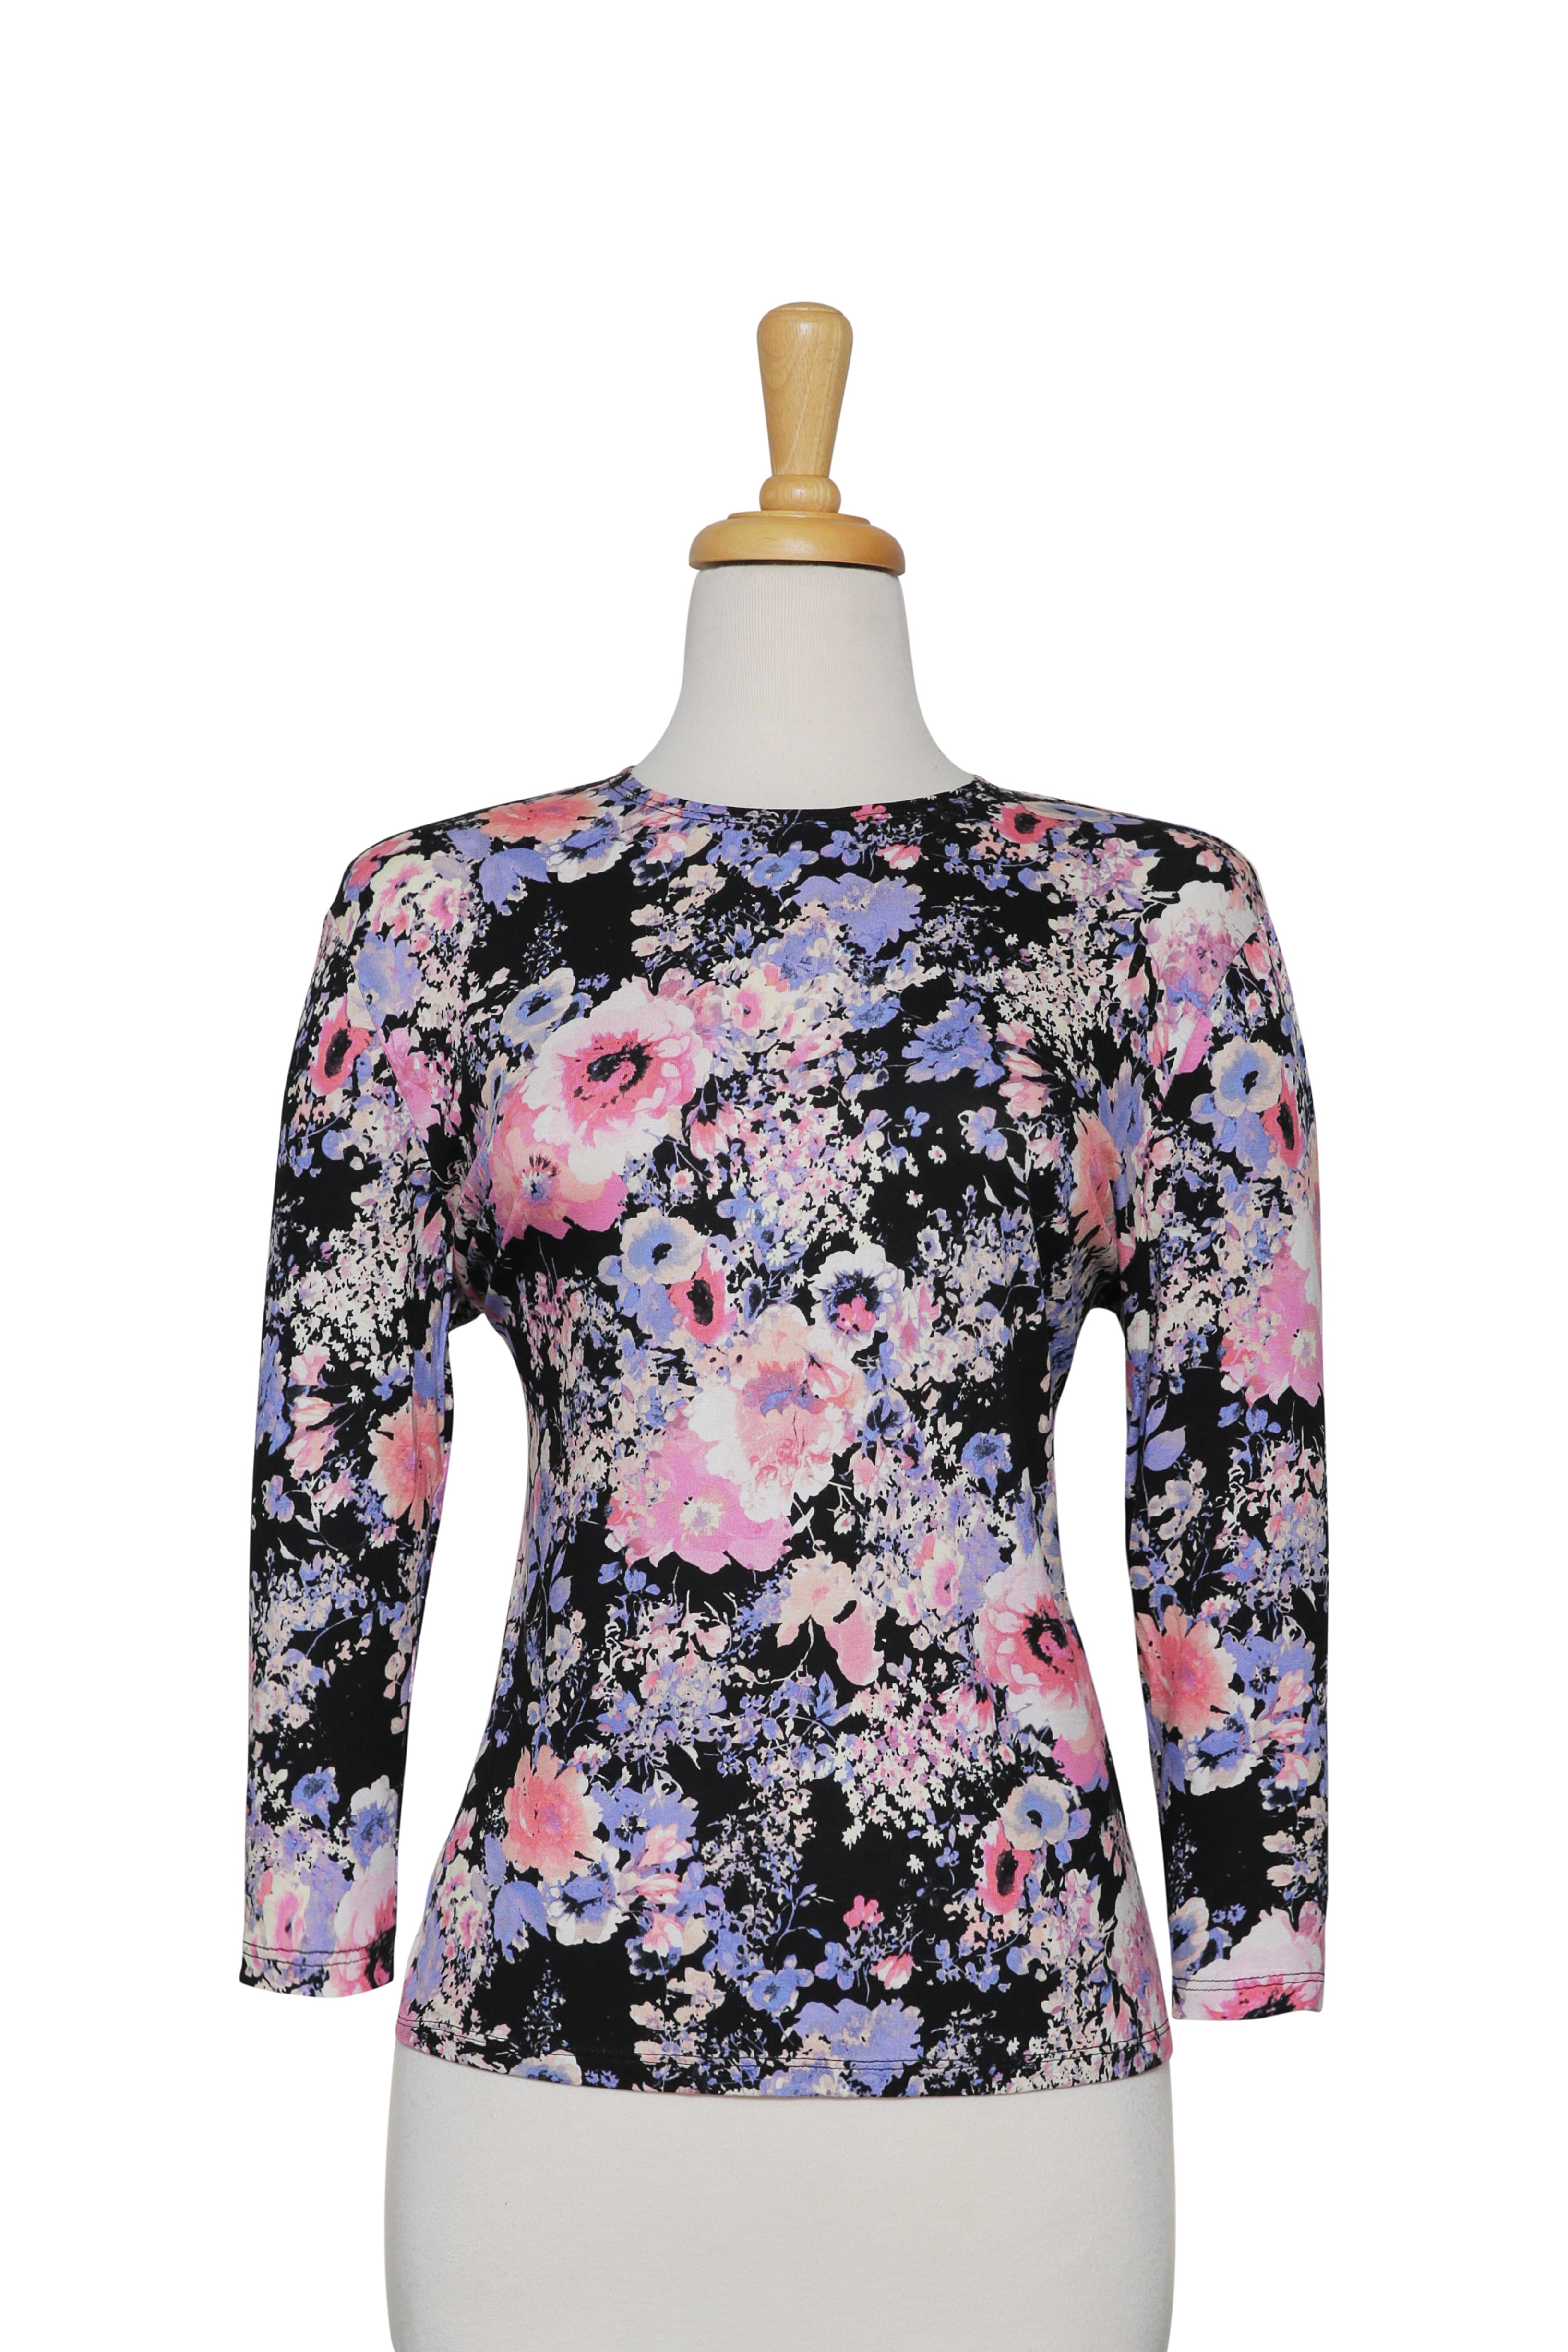 Black, Pink and Blue Floral Display Cotton 3/4 Sleeve Top 